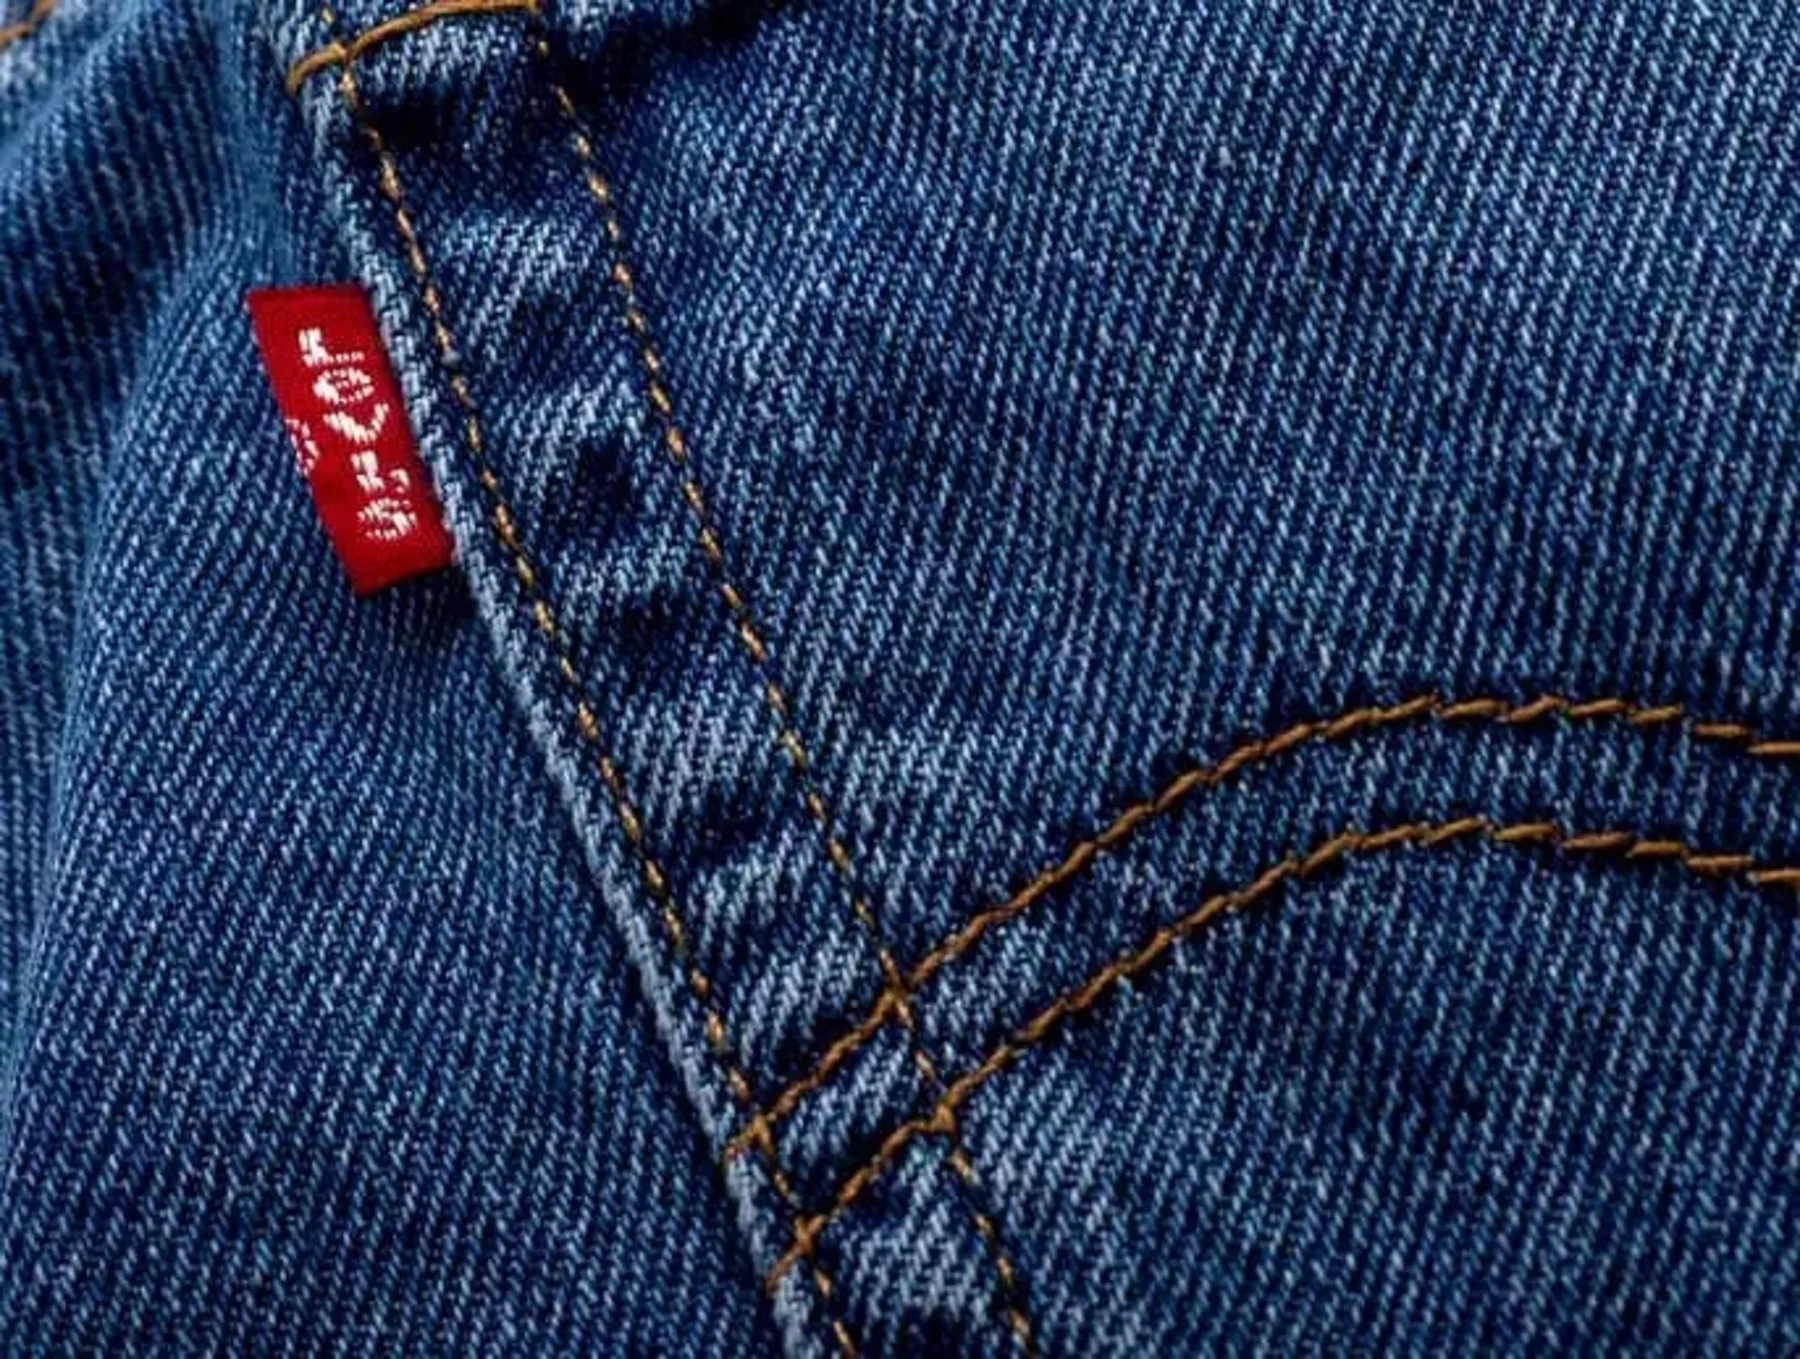 Levi's CEO Says You Should Never Put Your Jeans In The Washing Machine